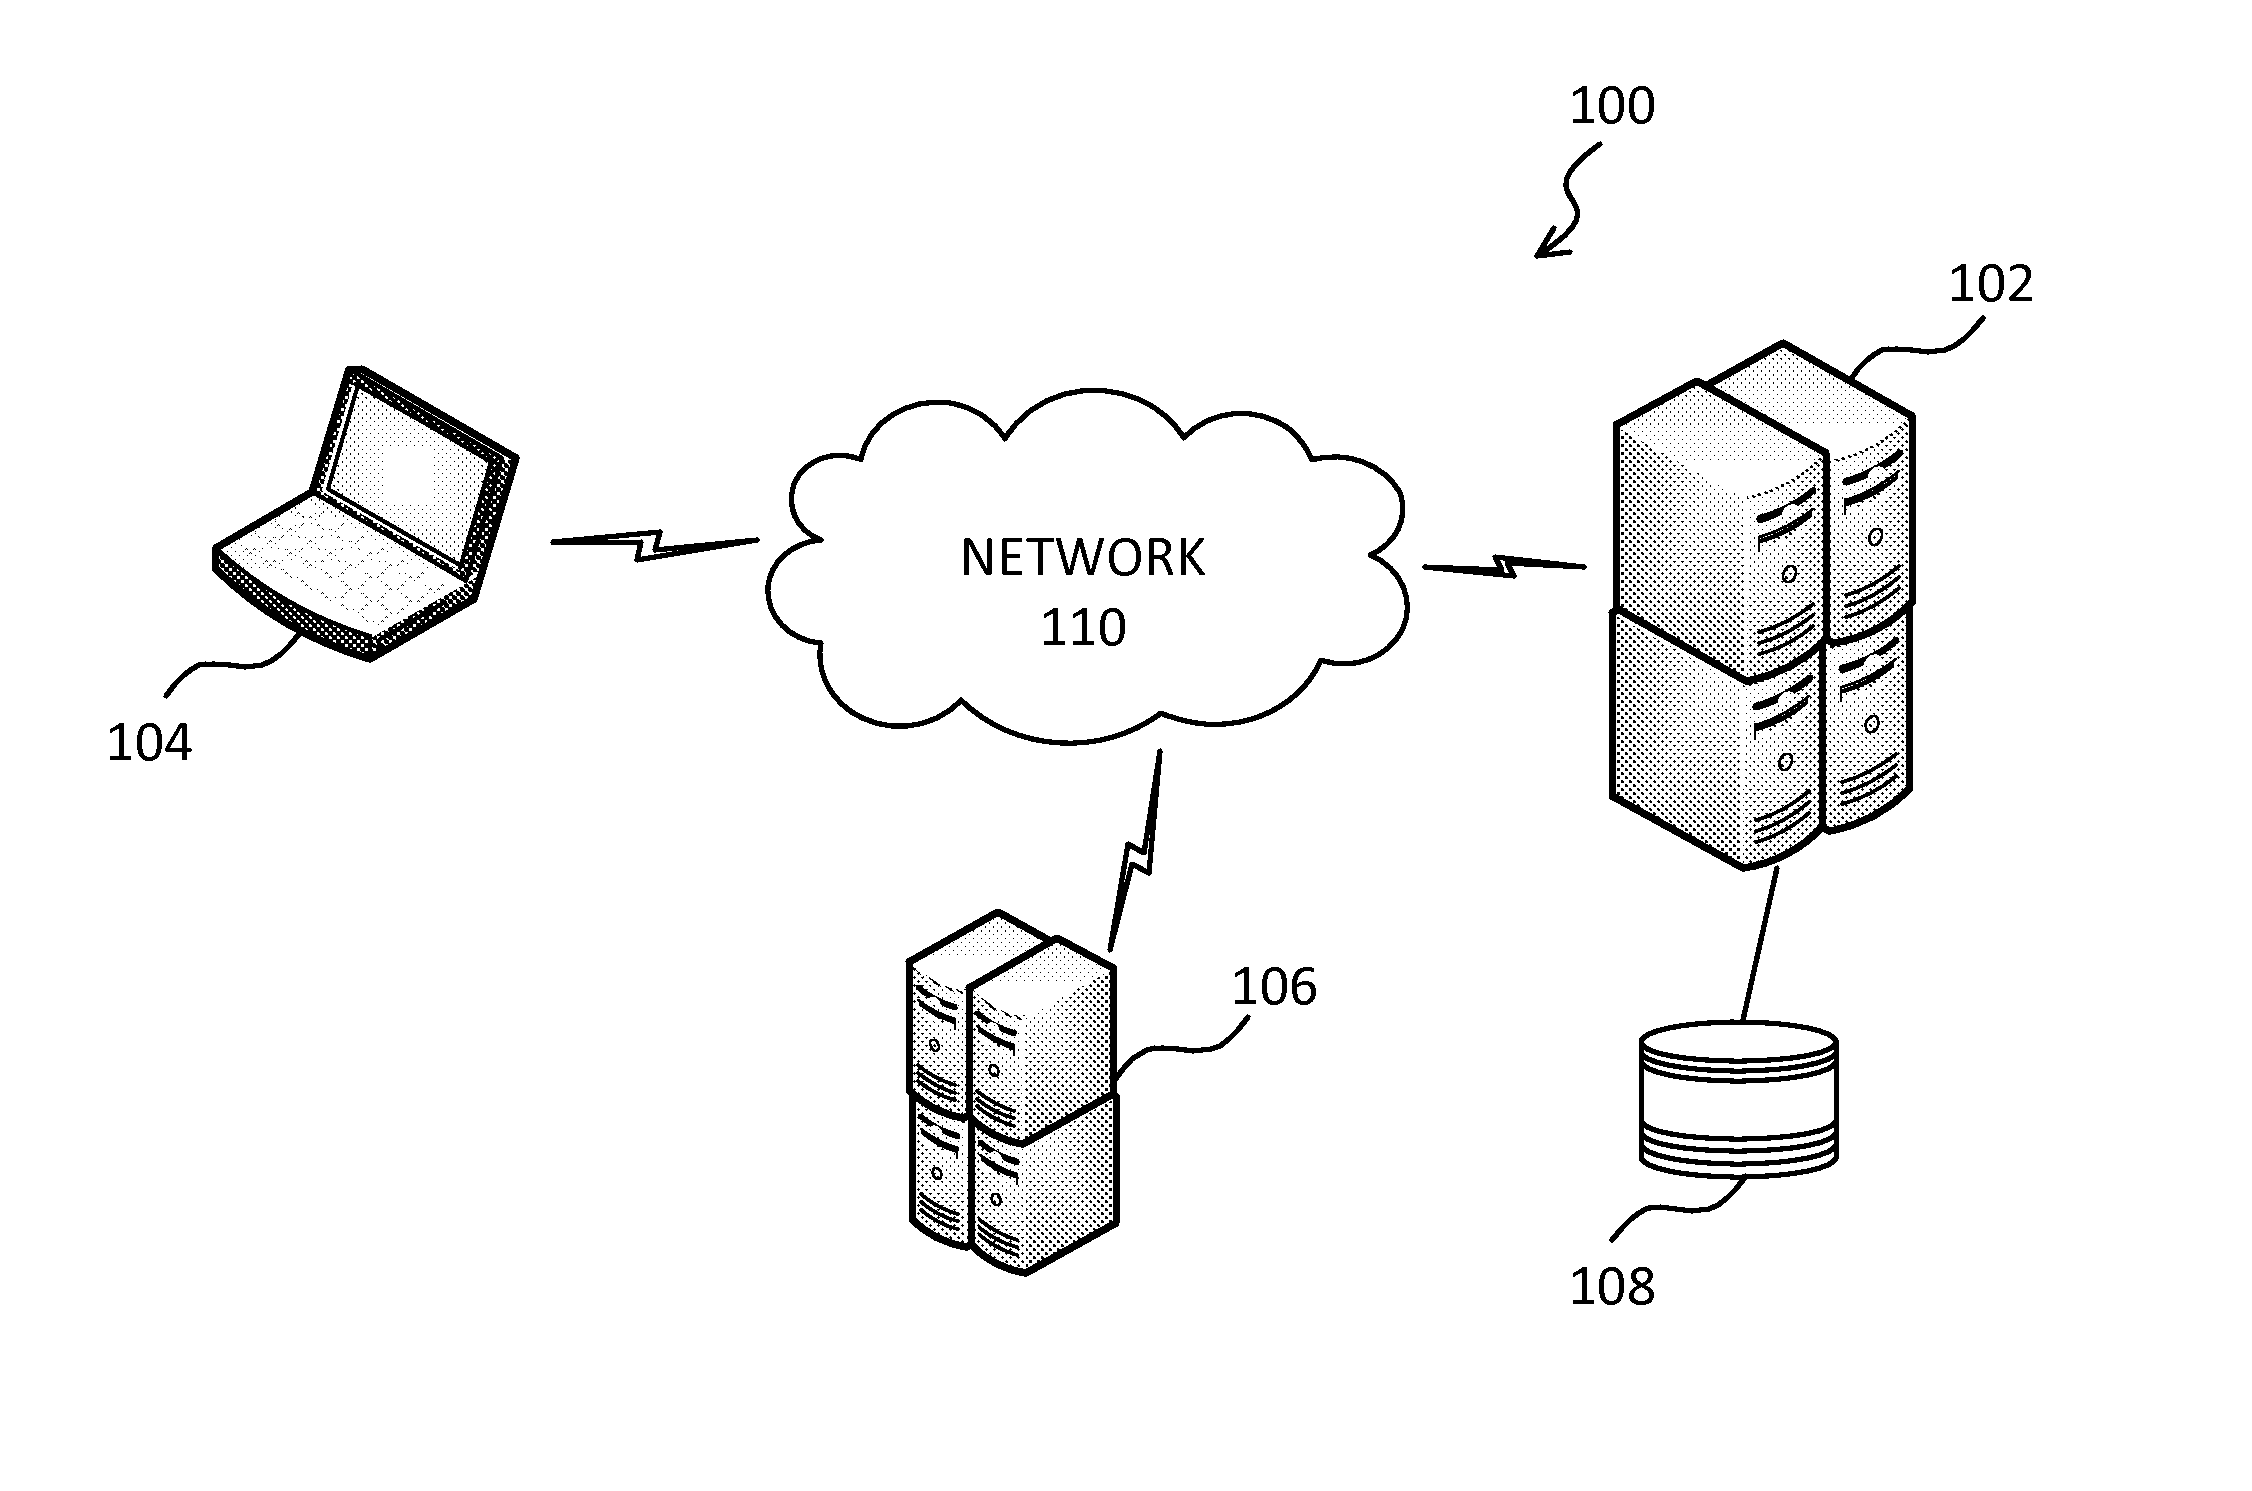 Method and system for authorizing remote access to customer account information